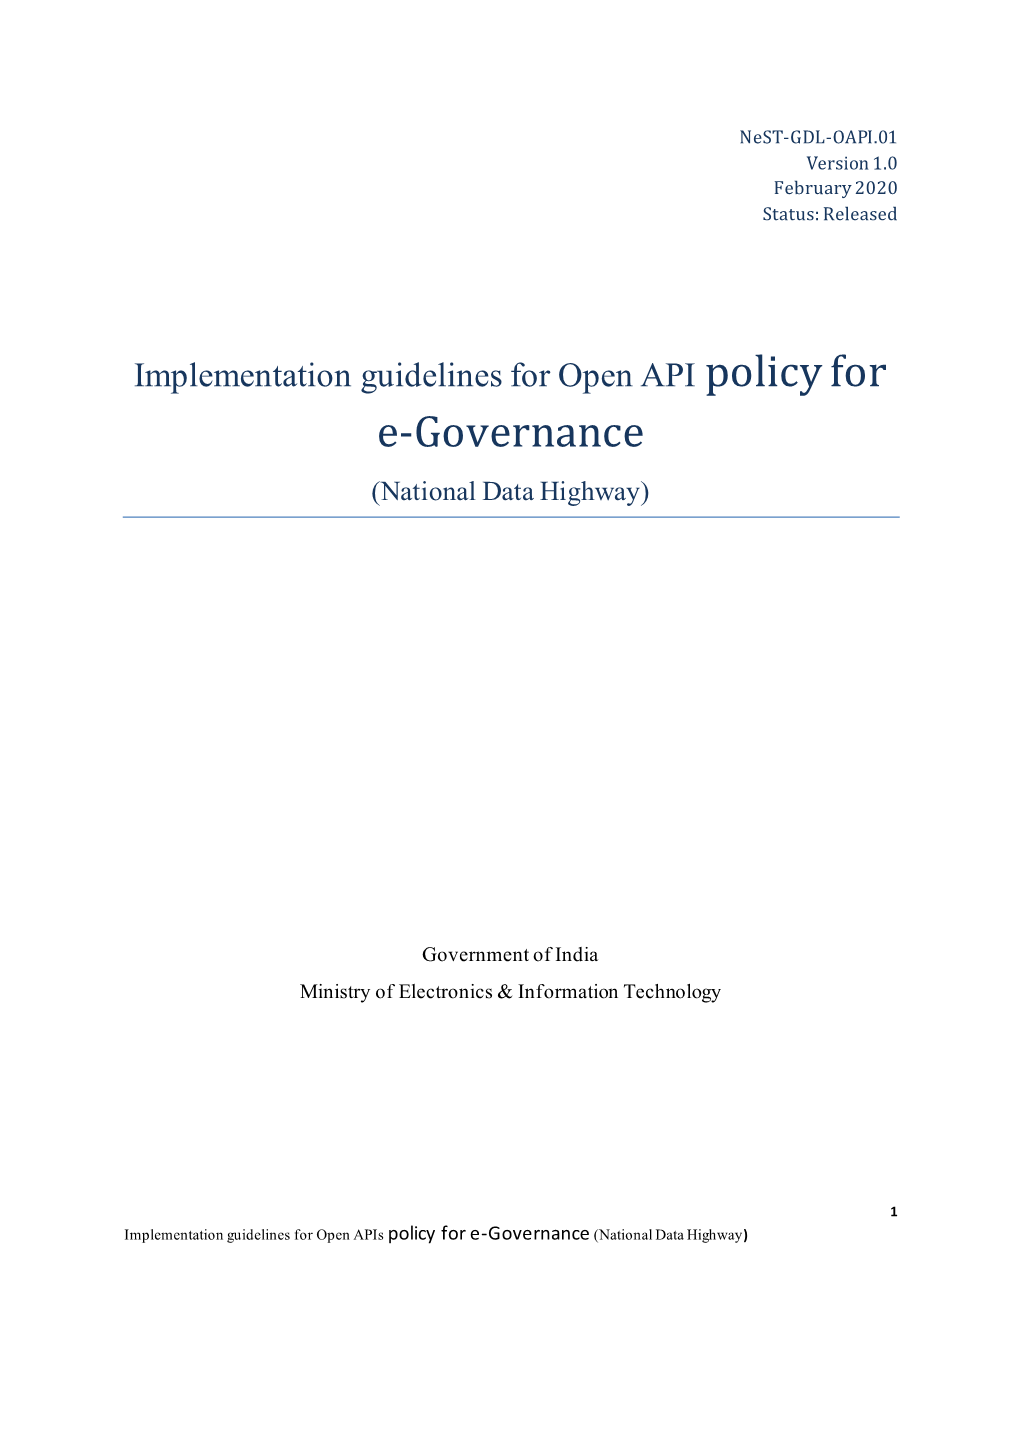 Implementation Guidelines for Open API Policy for E-Governance (National Data Highway)